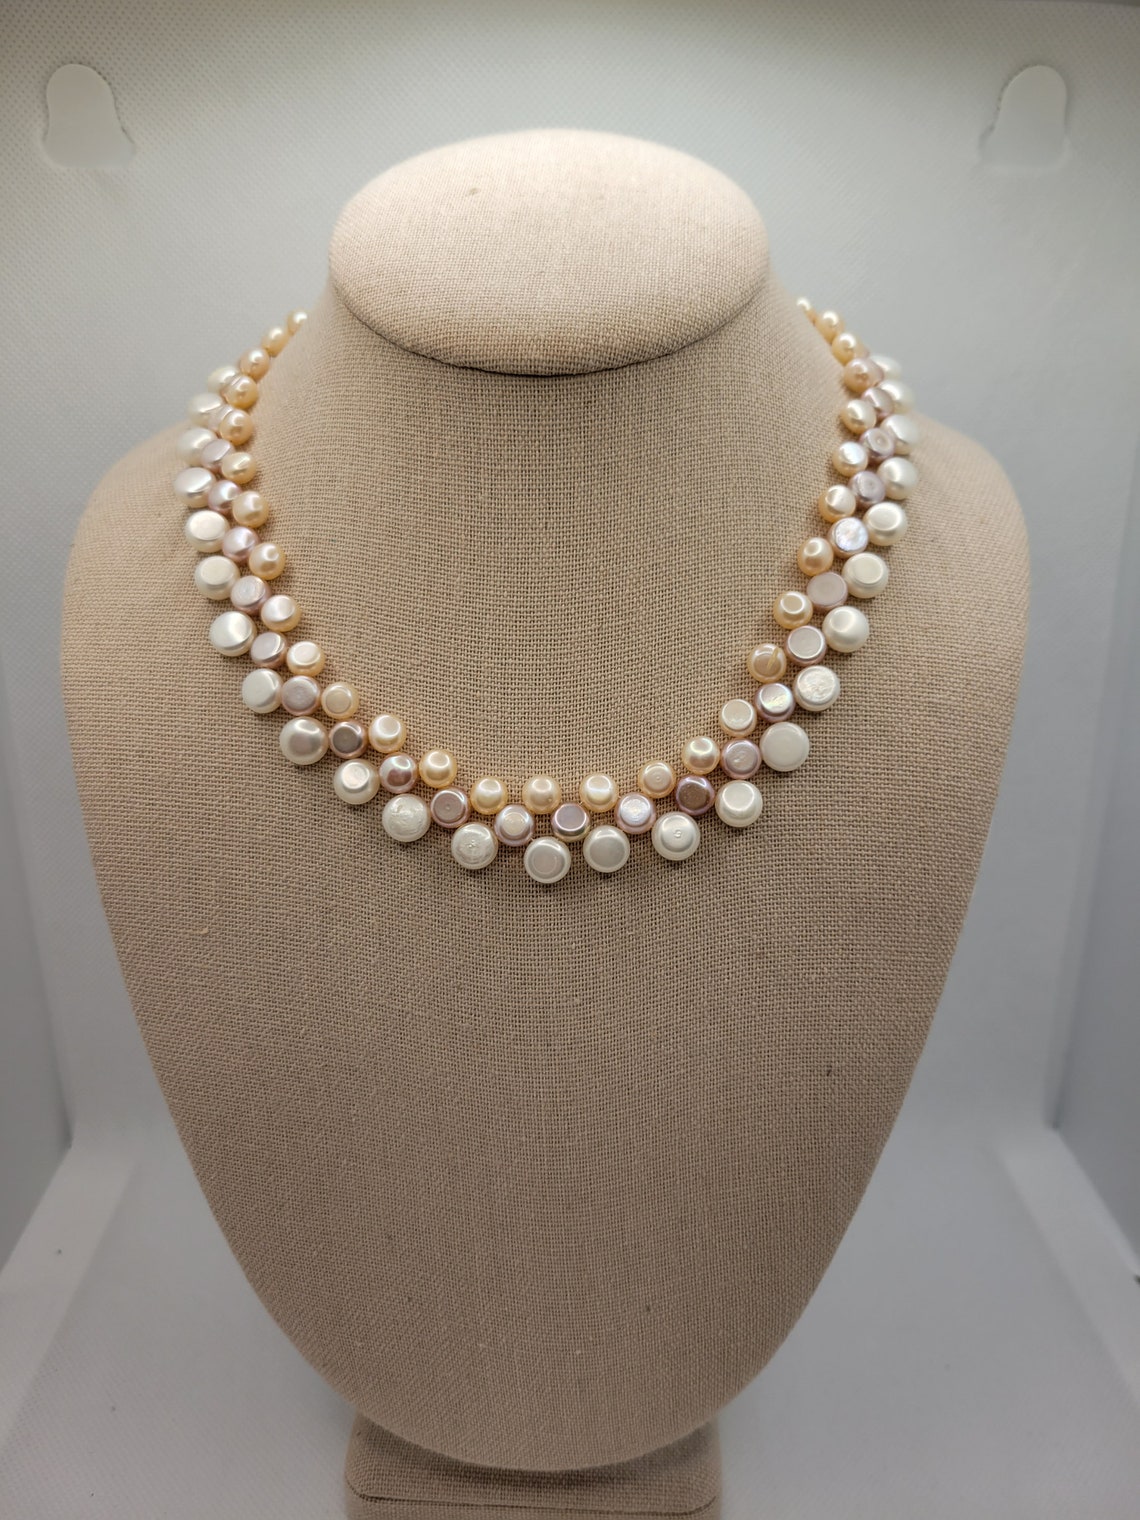 Faux Button Pearl Necklace Flat Back Beads in Blush Pink - Etsy